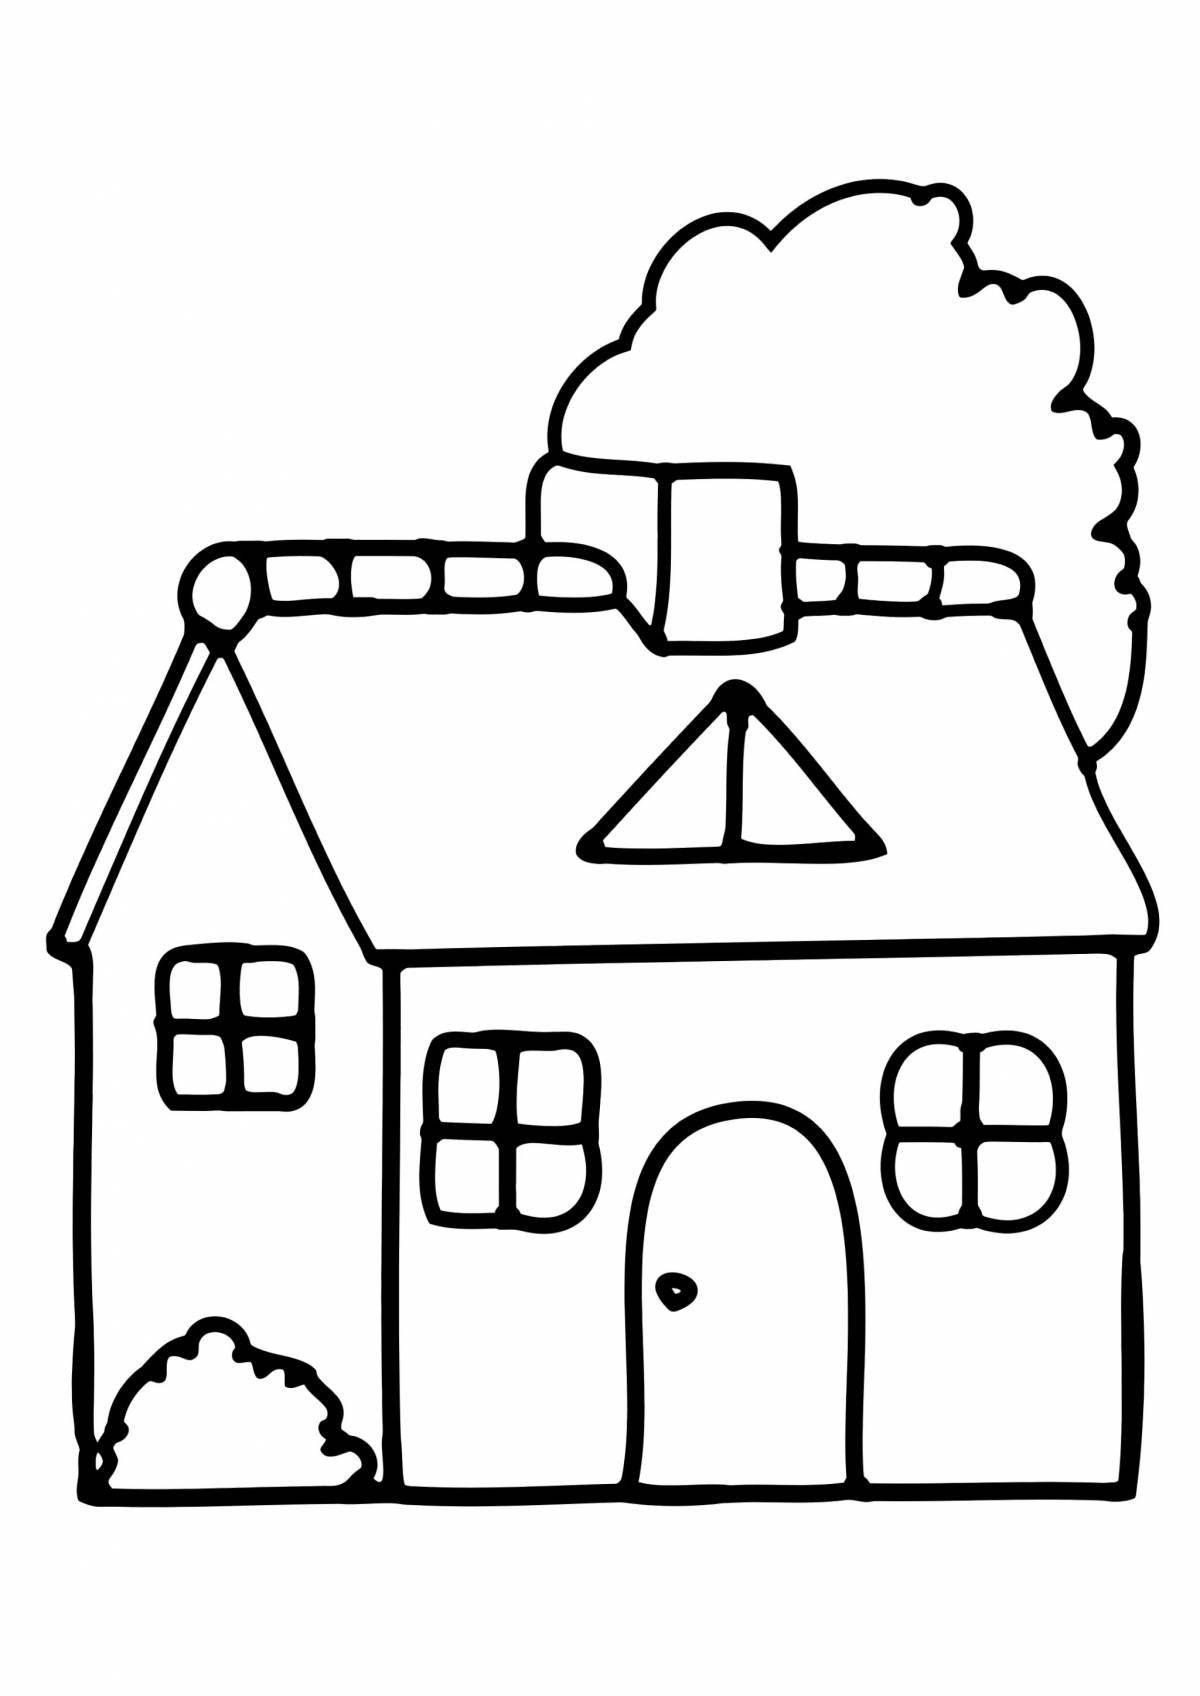 Incredible houses coloring pages for kids